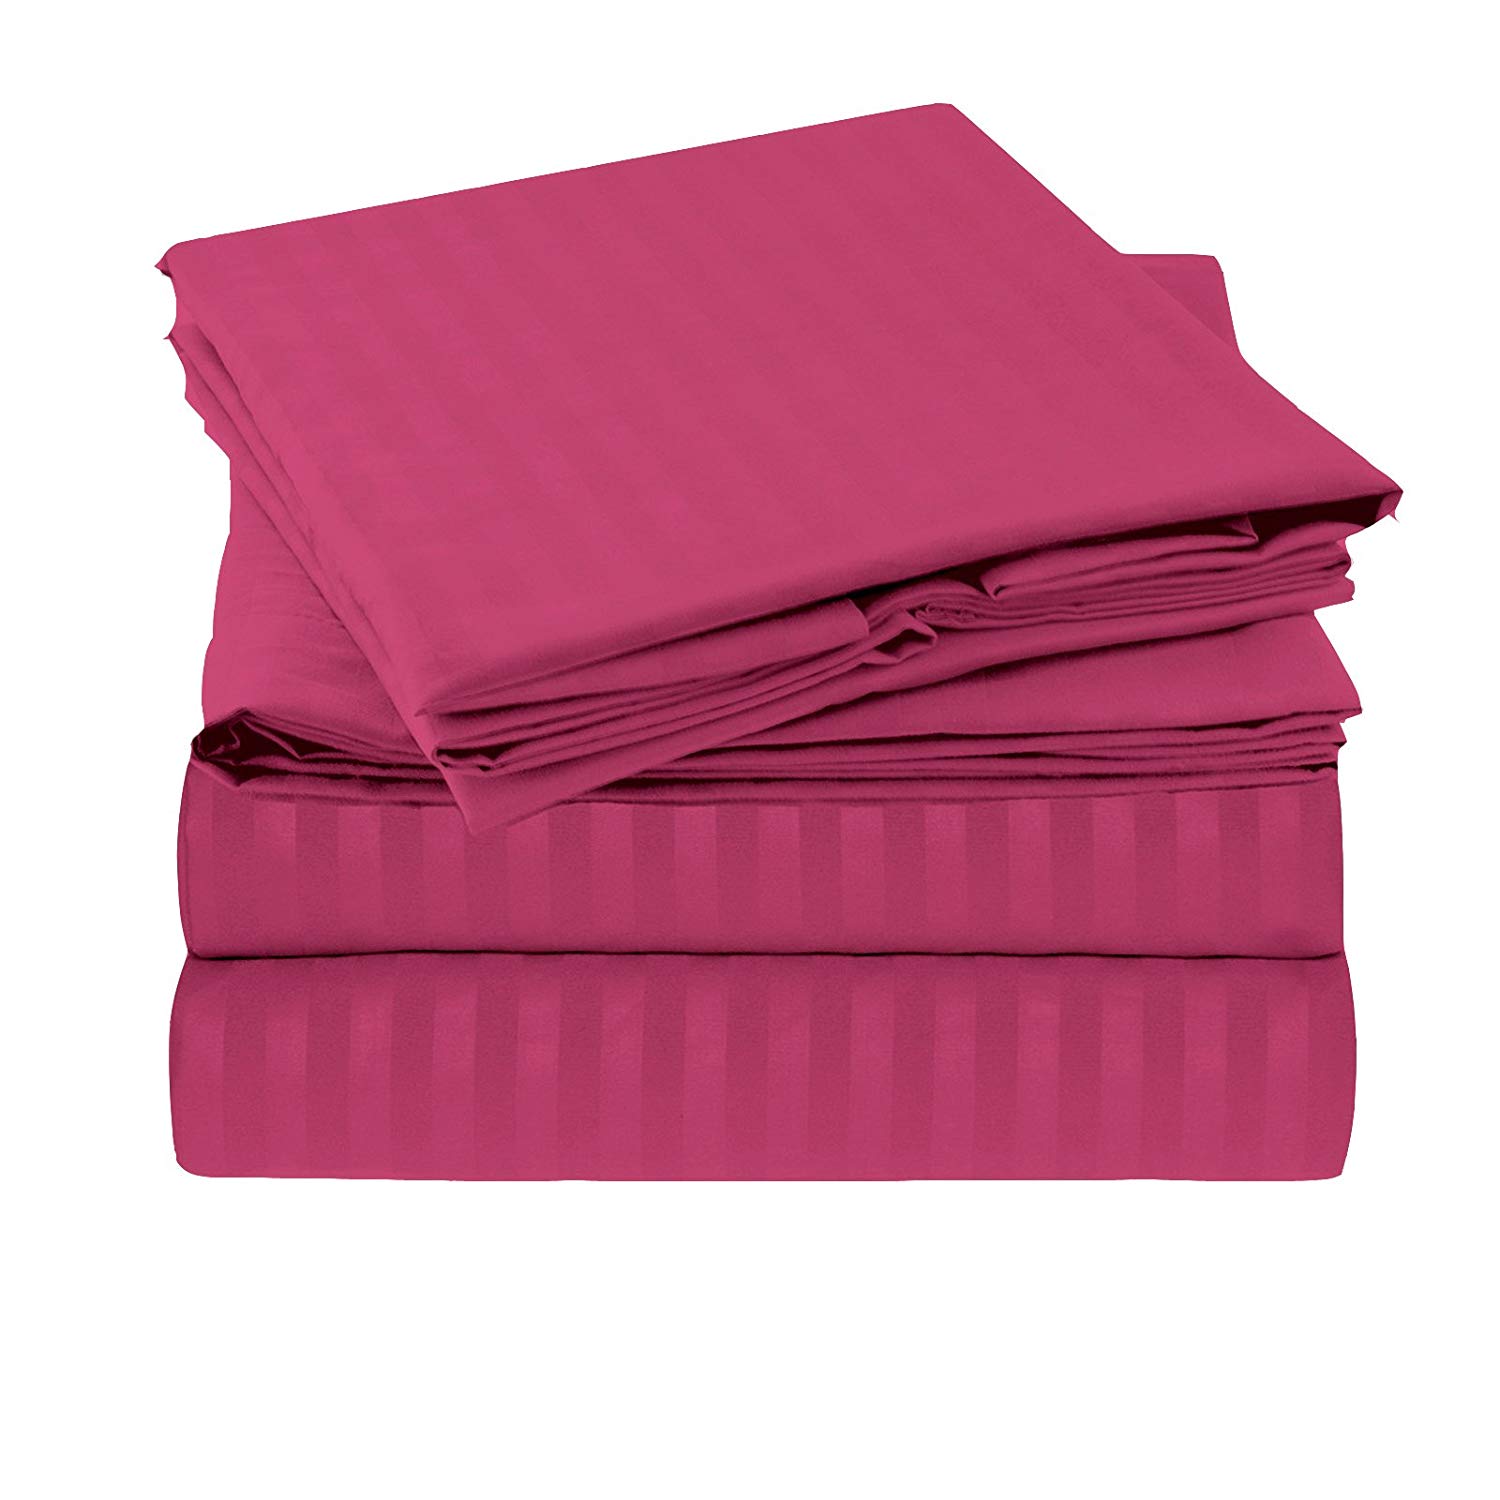 Dark Pink Self Design 300 TC King Size Pure Cotton Satin Slumber Sheet for Double Bed with 2 pillow covers